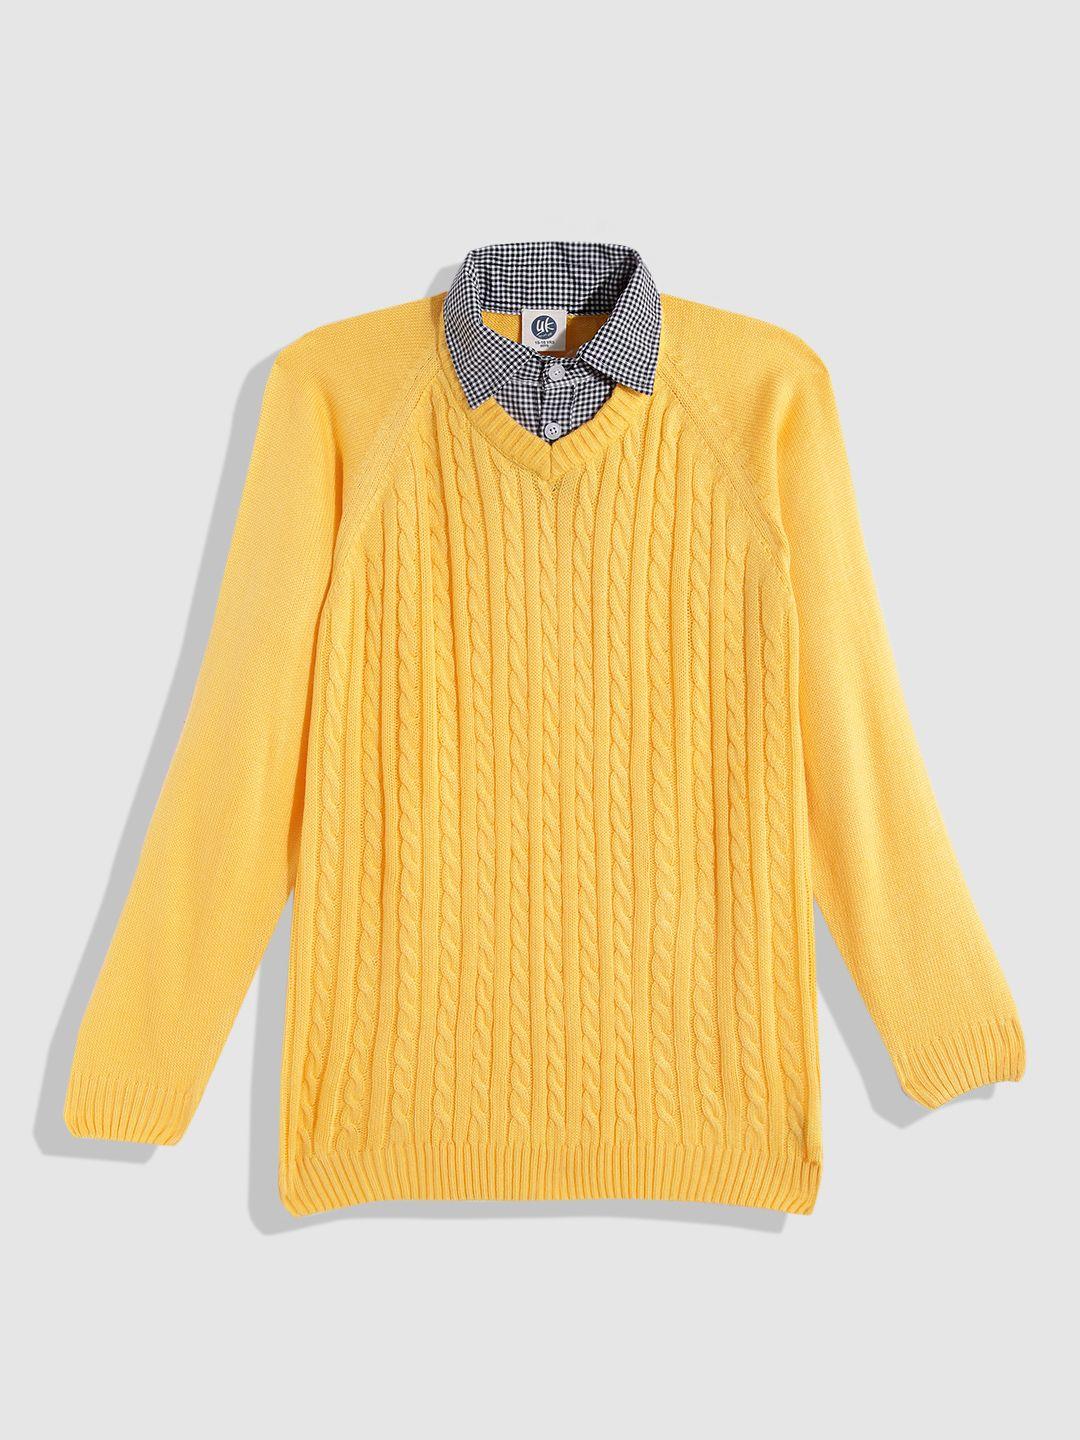 yk boys yellow & black cable knit pullover with attached shirt colalr